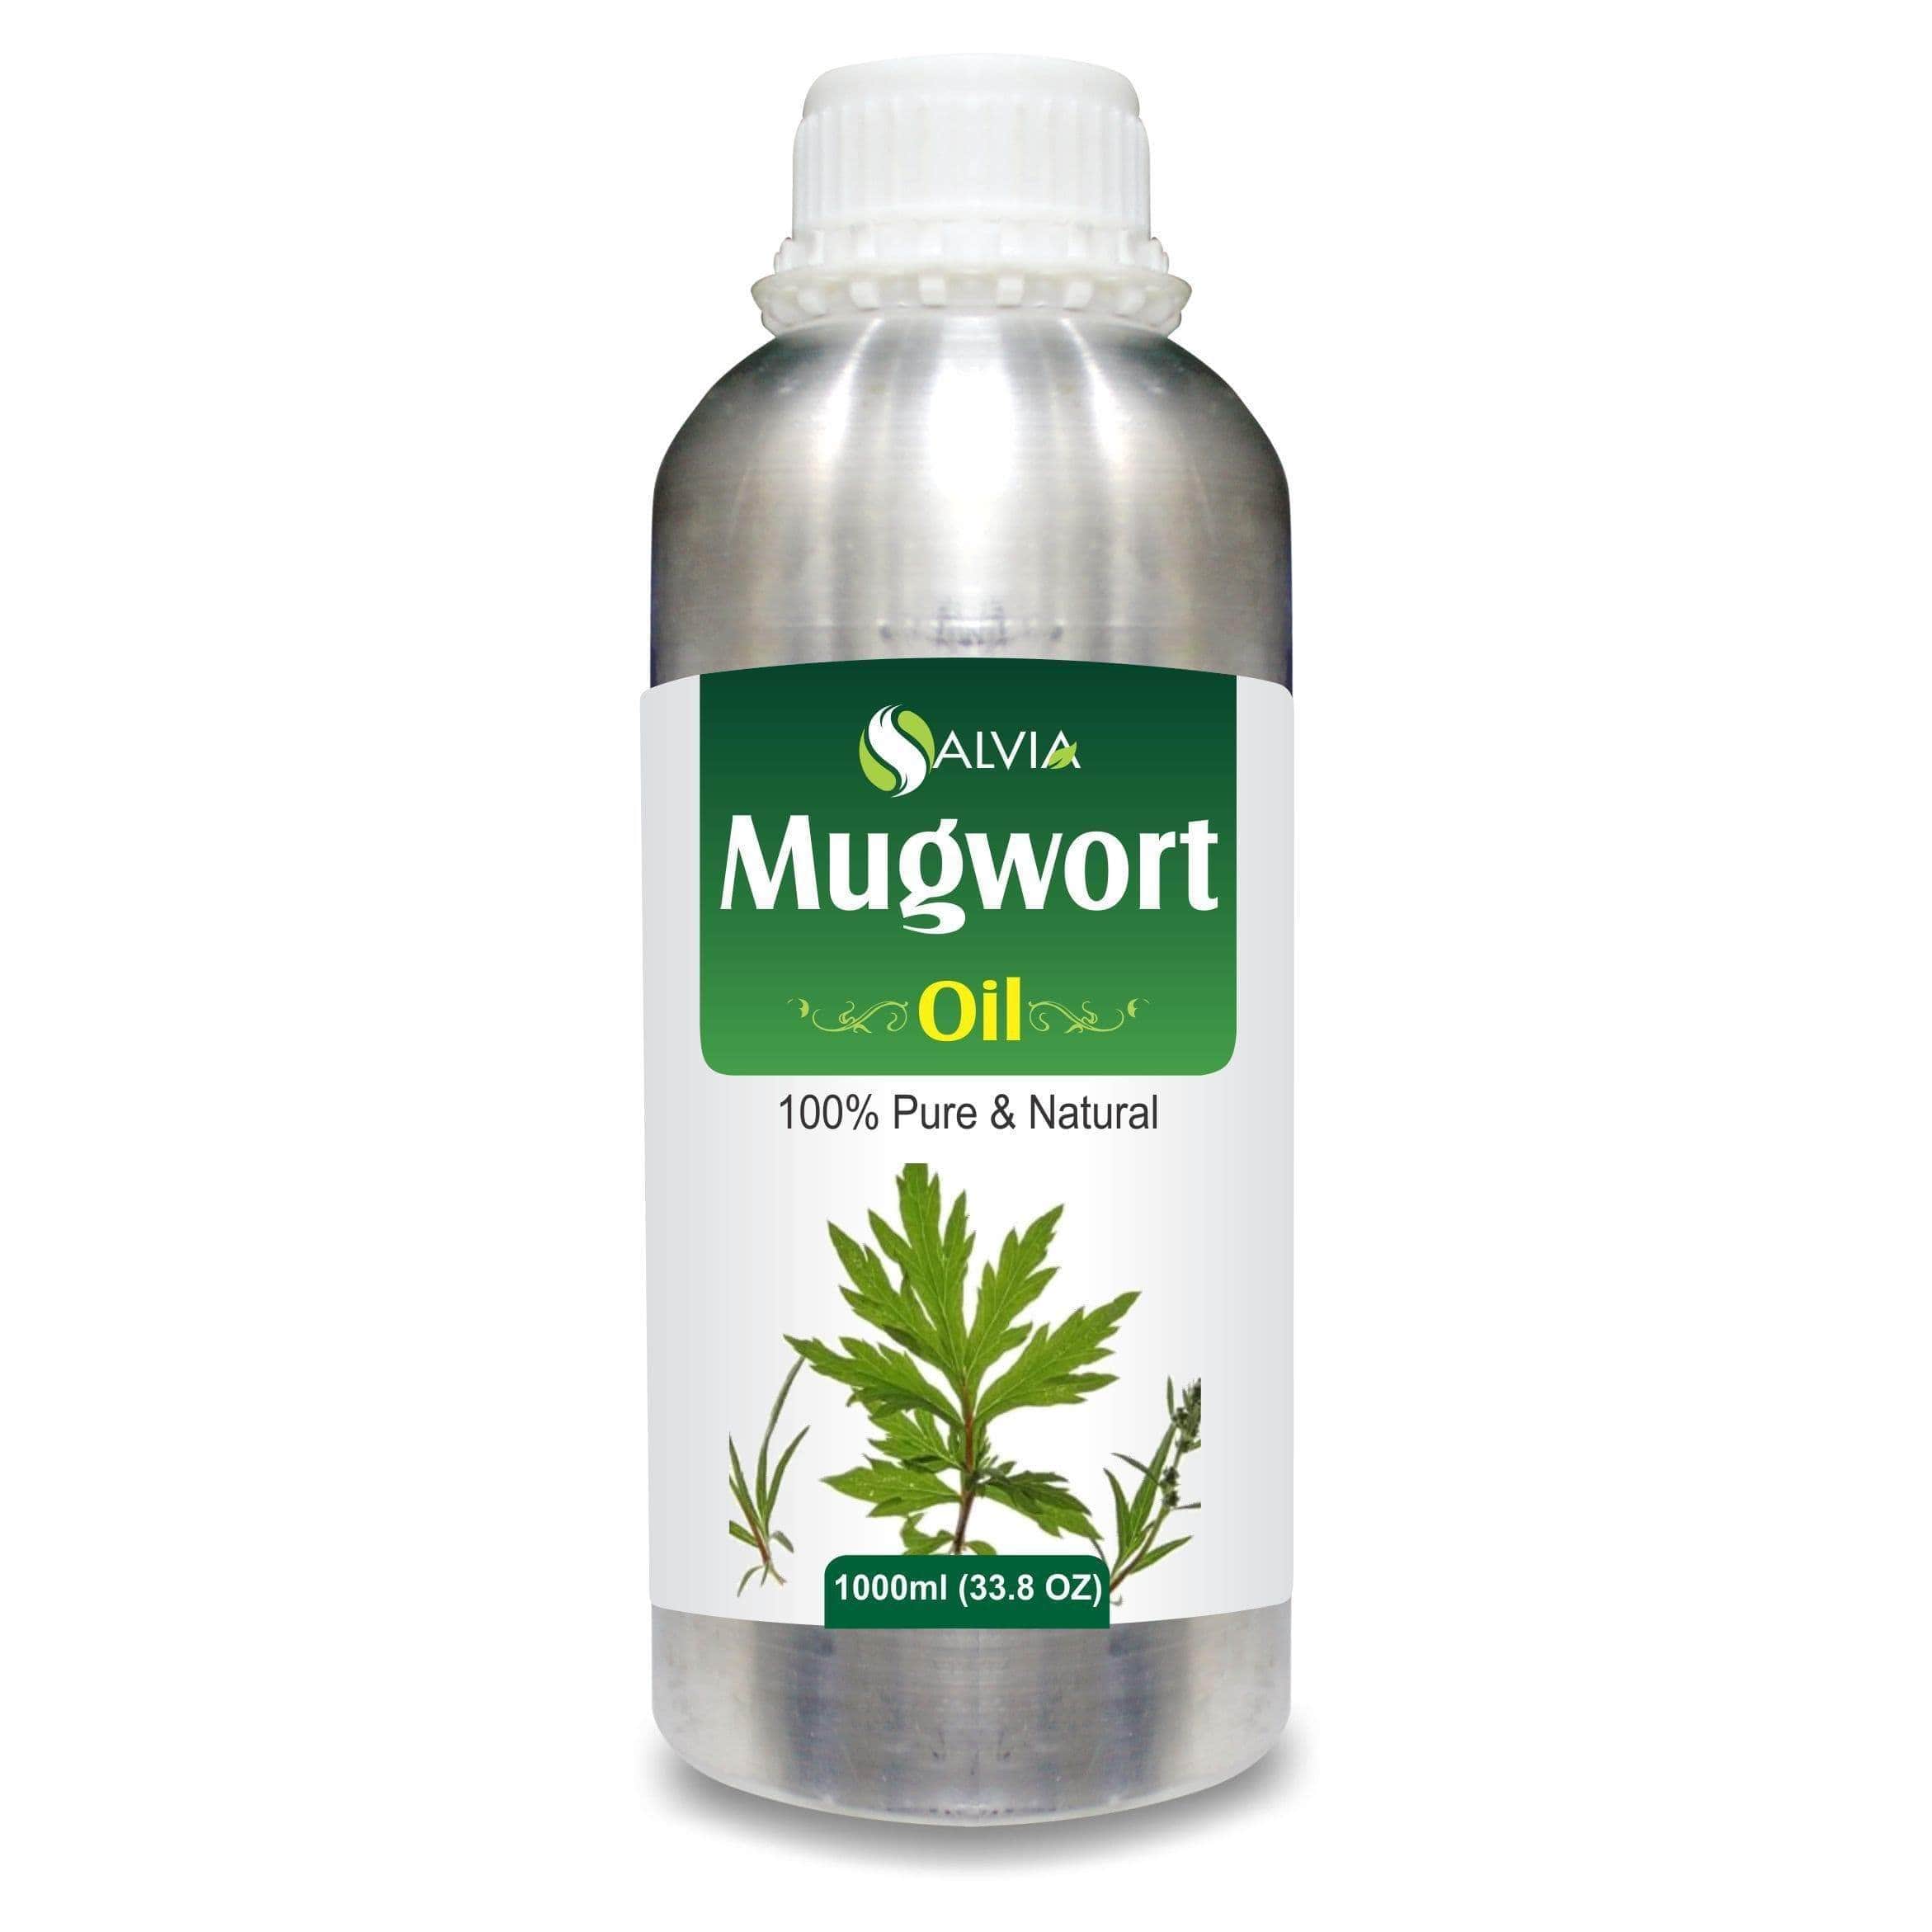 Salvia Natural Essential Oils 1000ml Mugwort Oil (Artemisia-Vulgaris) 100% Natural Pure Essential Oil Protects, Nourishes & Hydrates The Skin, Anti-Aging Properties, Removes Excessive Oil in Scalp